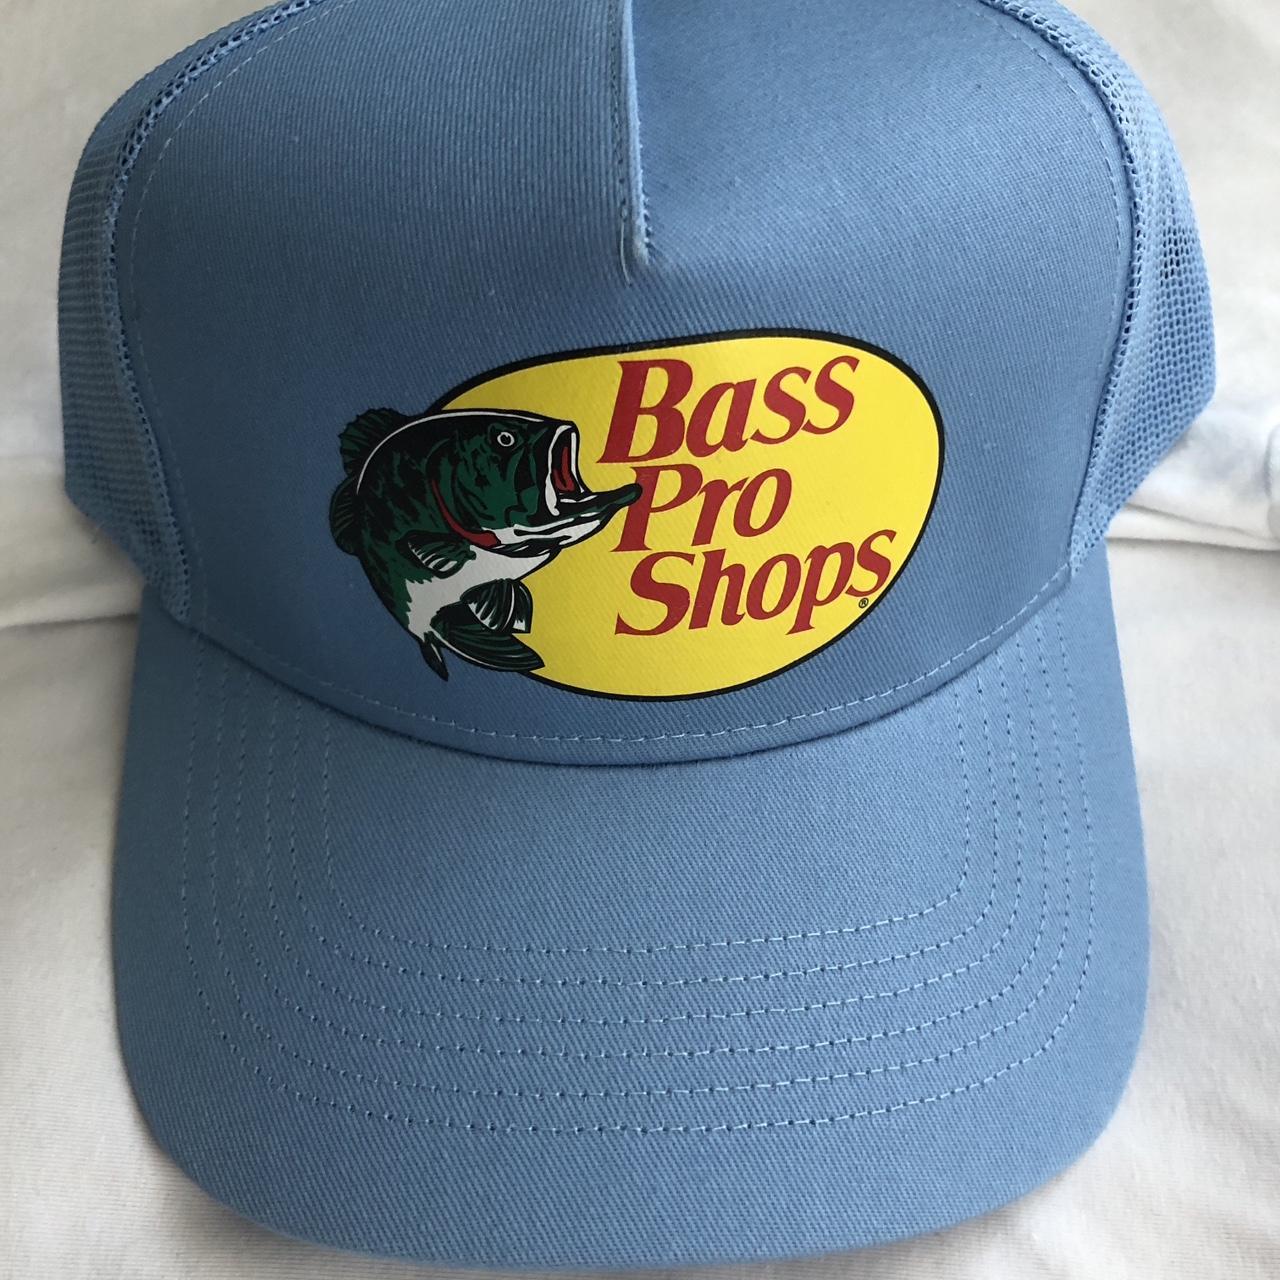 New Light Blue Bass Pro Shops Hat with Tags (ONLY 1 - Depop